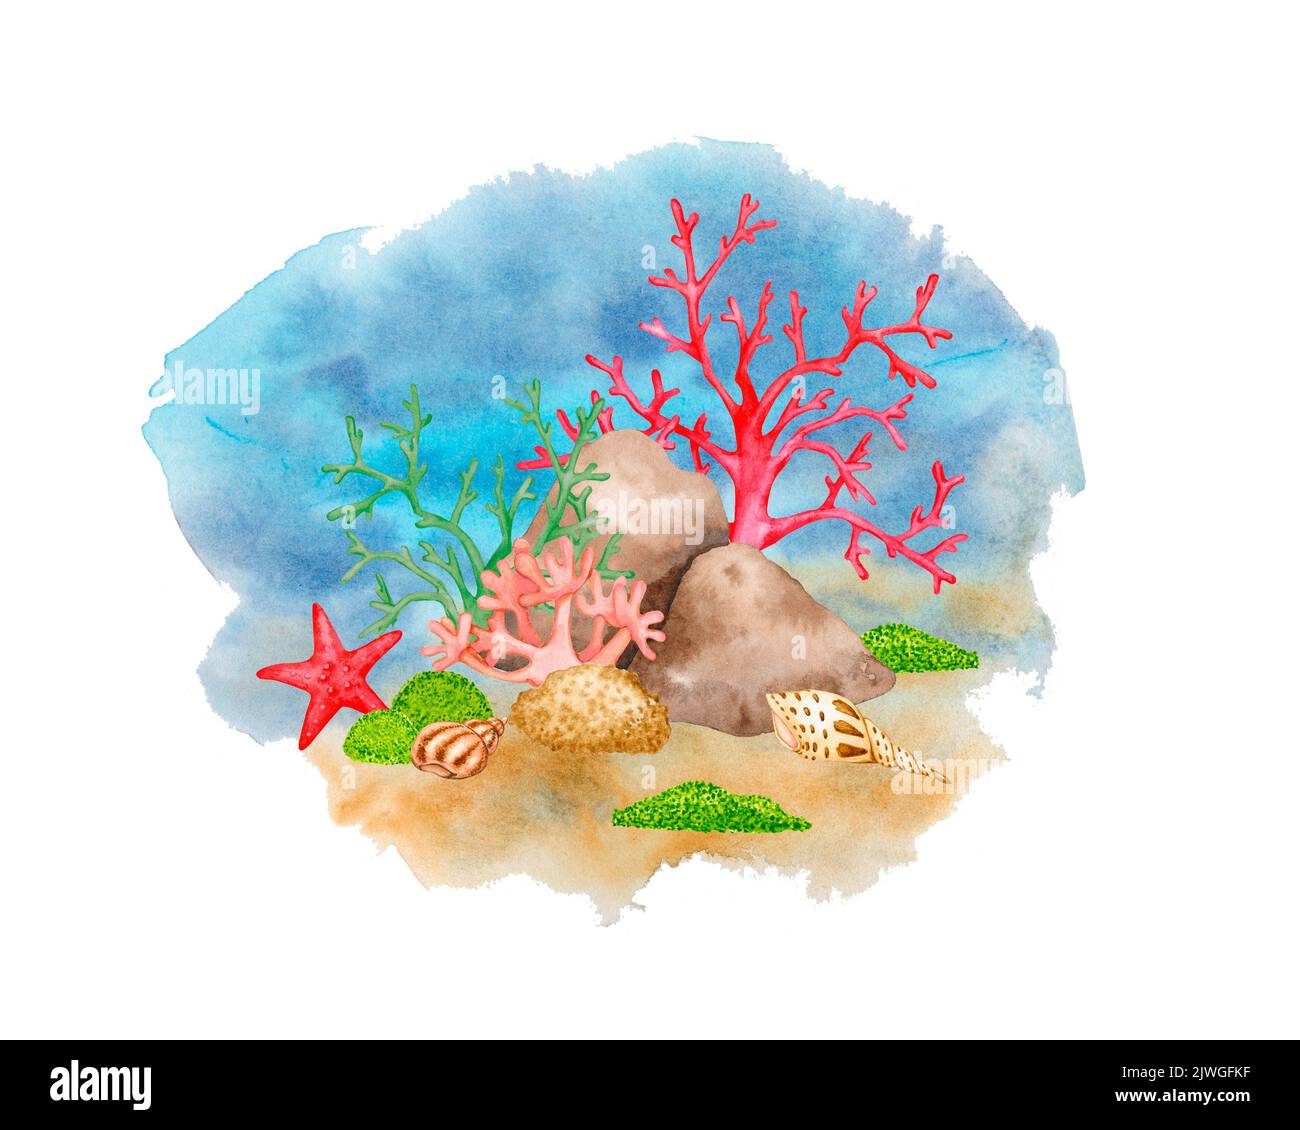 Sea bottom. Watercolor composition. Coral reef, shellfish, starfish. Illustration for logo, label, poster, print, postcard, stationery. Stock Photo